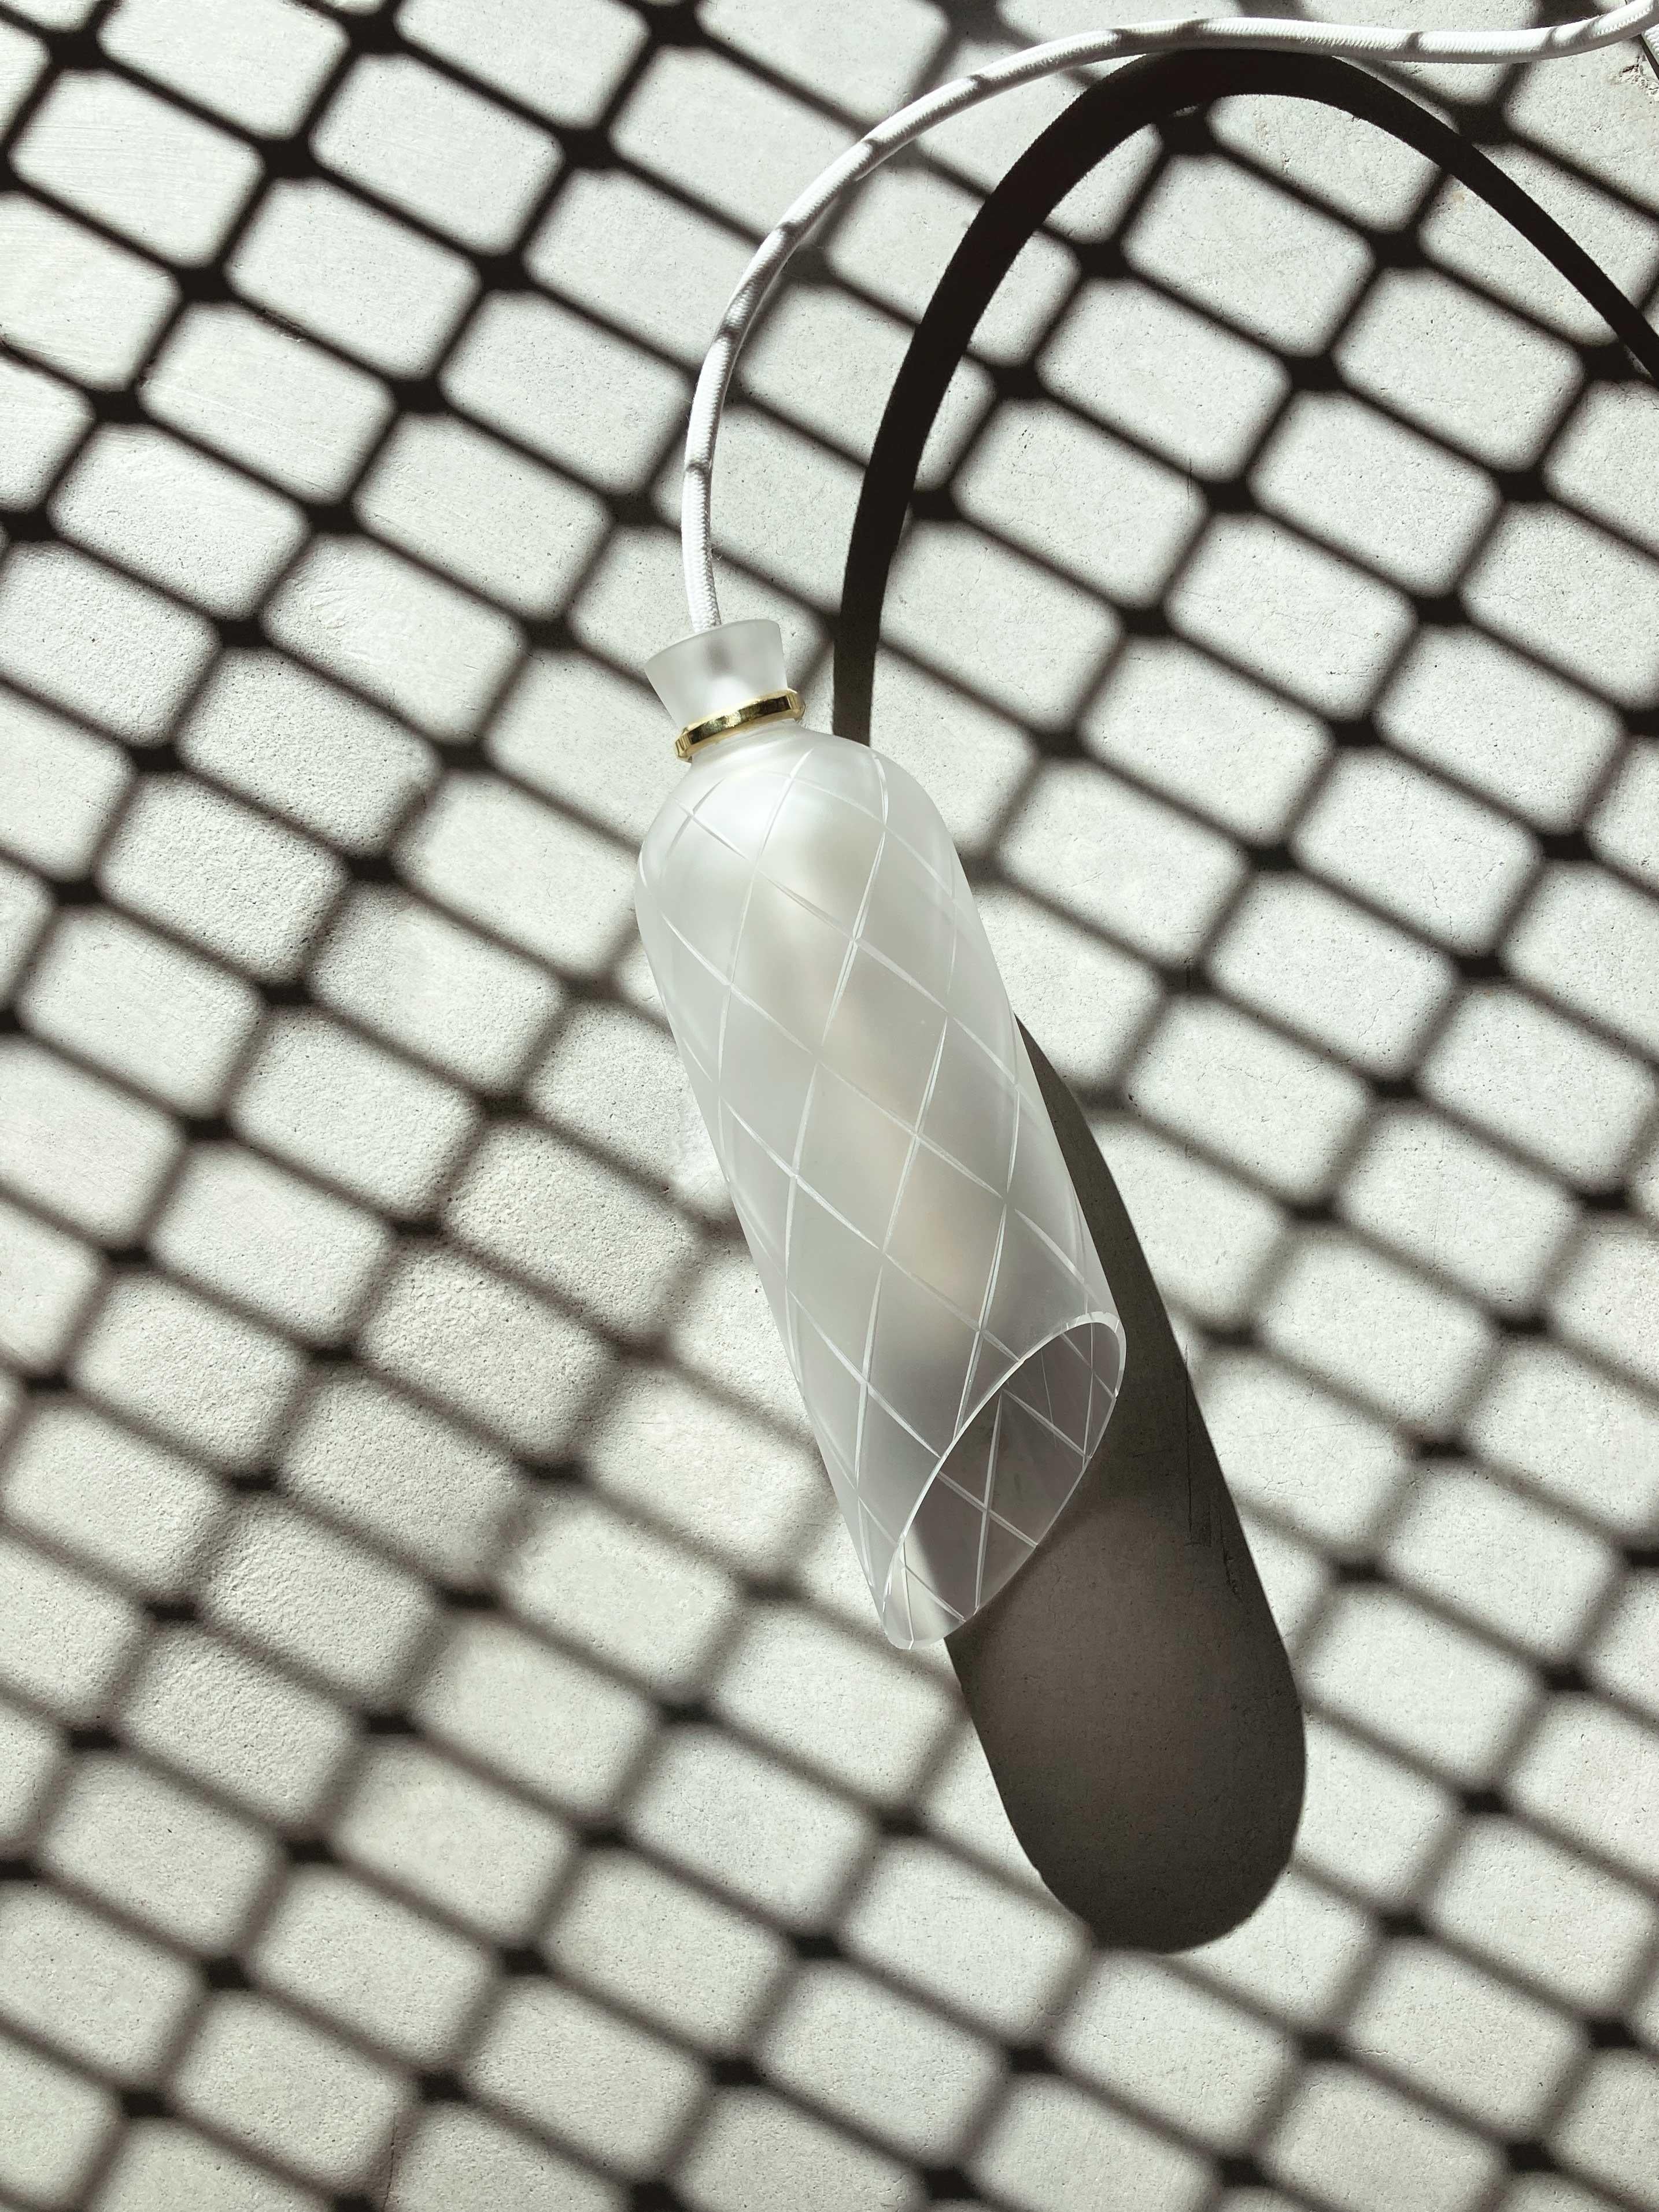 Salma lamp by Kickie Chudikova
Limited Edition of 20 pieces - 10 in Stock
Made to order - Crystal glass, handmade in Czech Republic.
Sold as single pendant or arrangement of 3 or 5 pieces.
Dimensions: D 8 x H 26 cm
Materials: Glass,